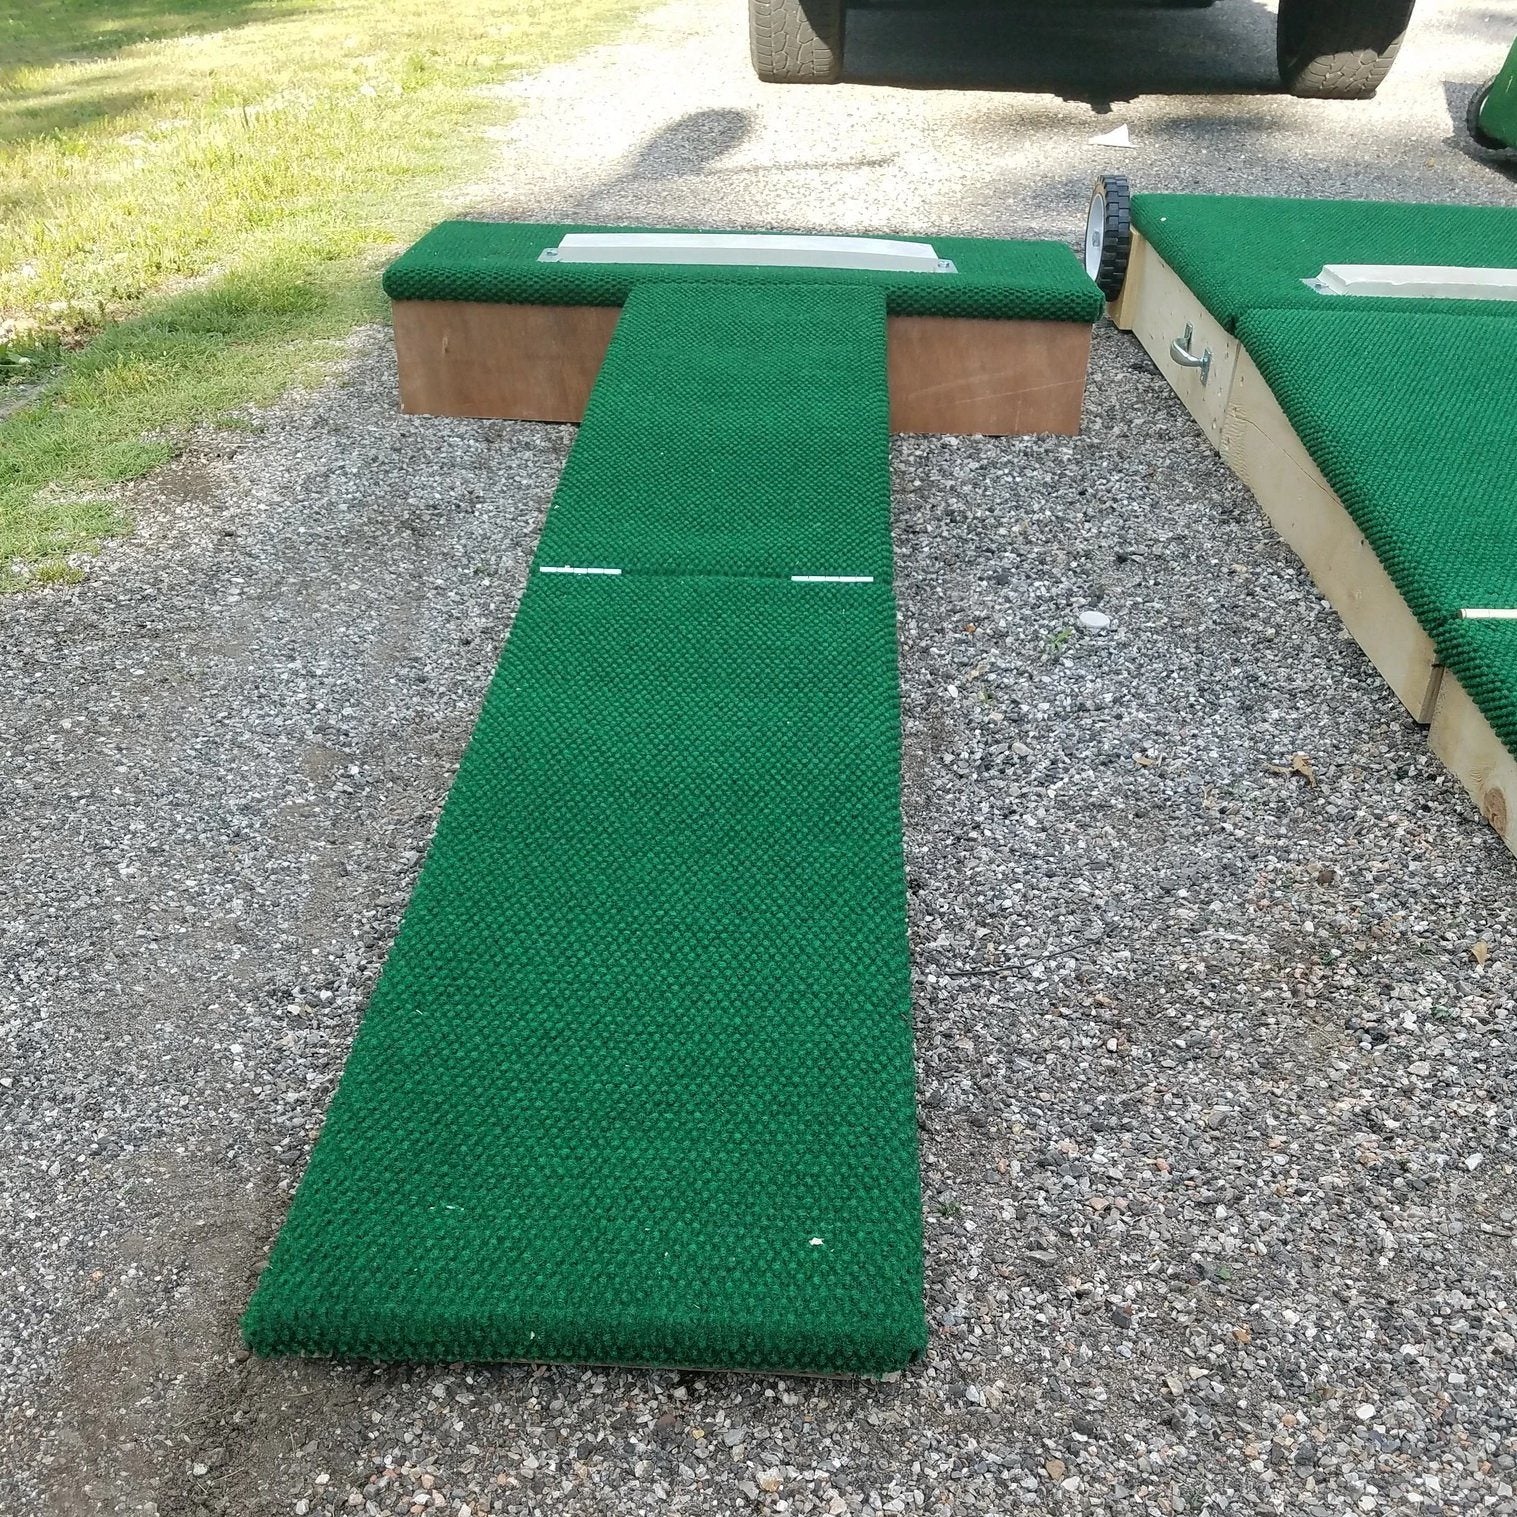 8" Tall Step Straight Portable Pitching Mound